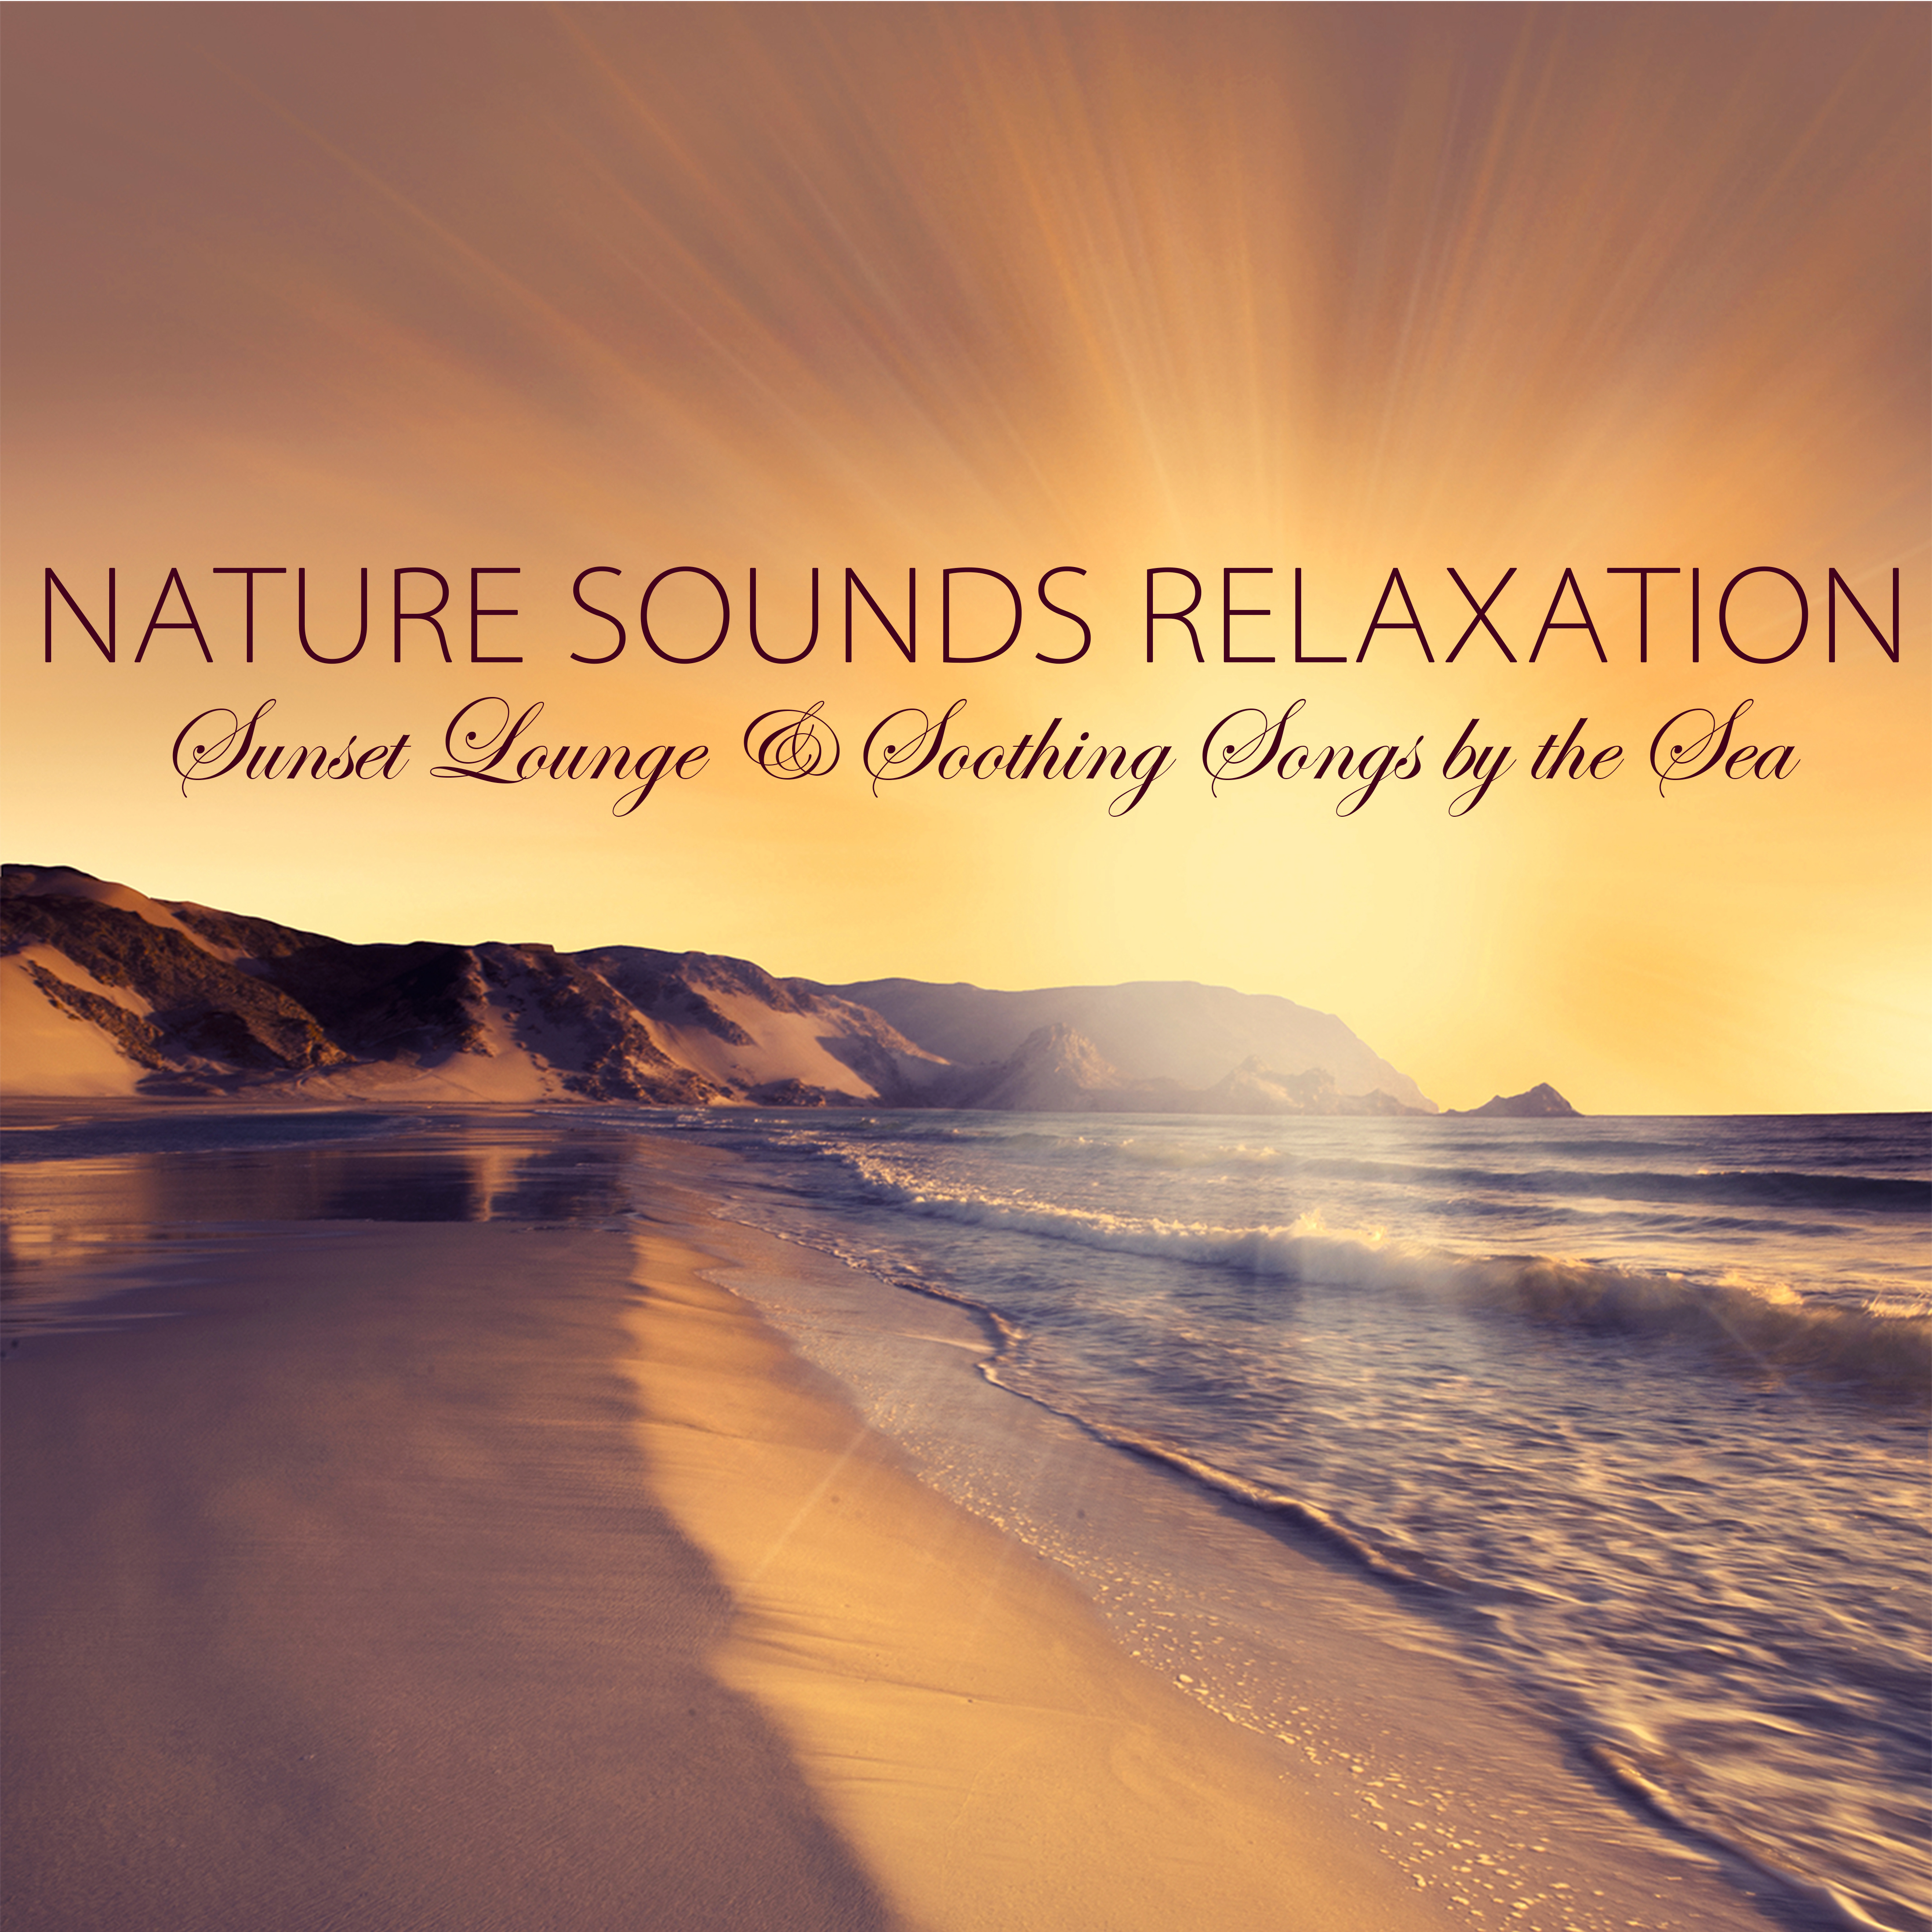 Nature Sounds Relaxation - Guitar Nature Music, Sunset Lounge & Soothing Songs by the Sea